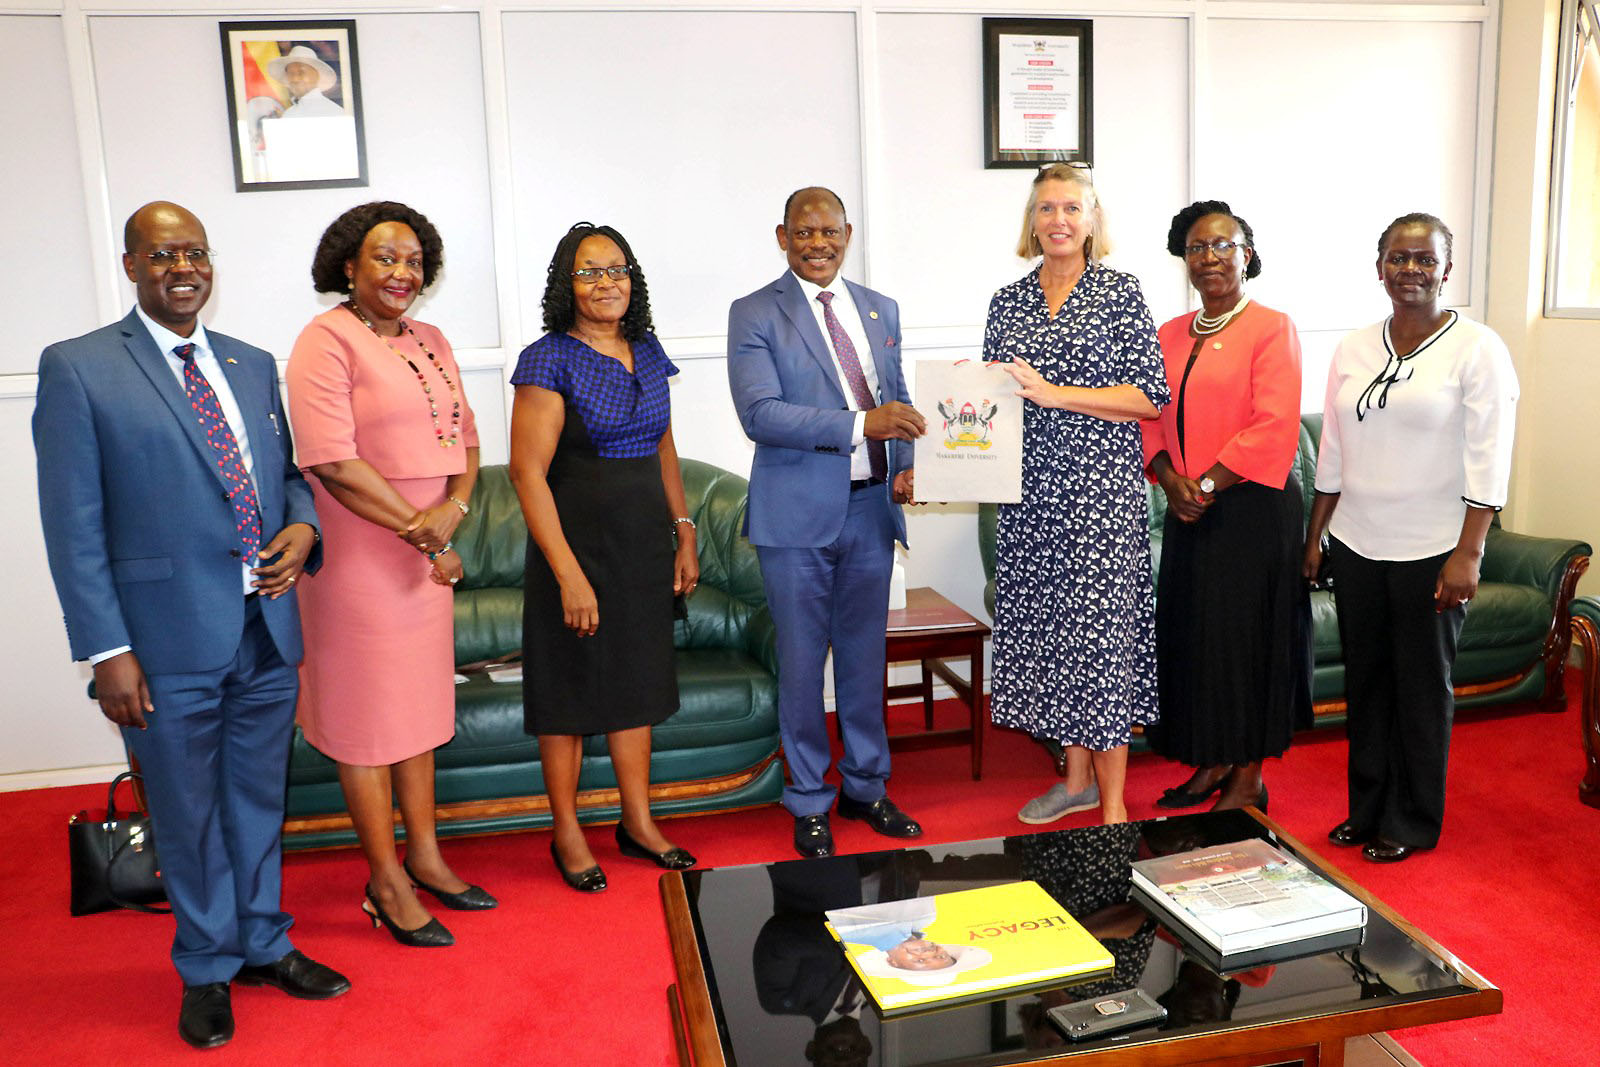 H.E. Dr. Karin Boven, Ambassador of the Netherlands to Uganda (3rd R) receives an assortment of Mak souvenirs from the Vice Chancellor, Prof. Barnabas Nawangwe (C) as the Dean MakSPH, Prof. Rhoda Wanyenze (2nd L) and other officials witness on 13th April 2022, CTF1, Makerere University.